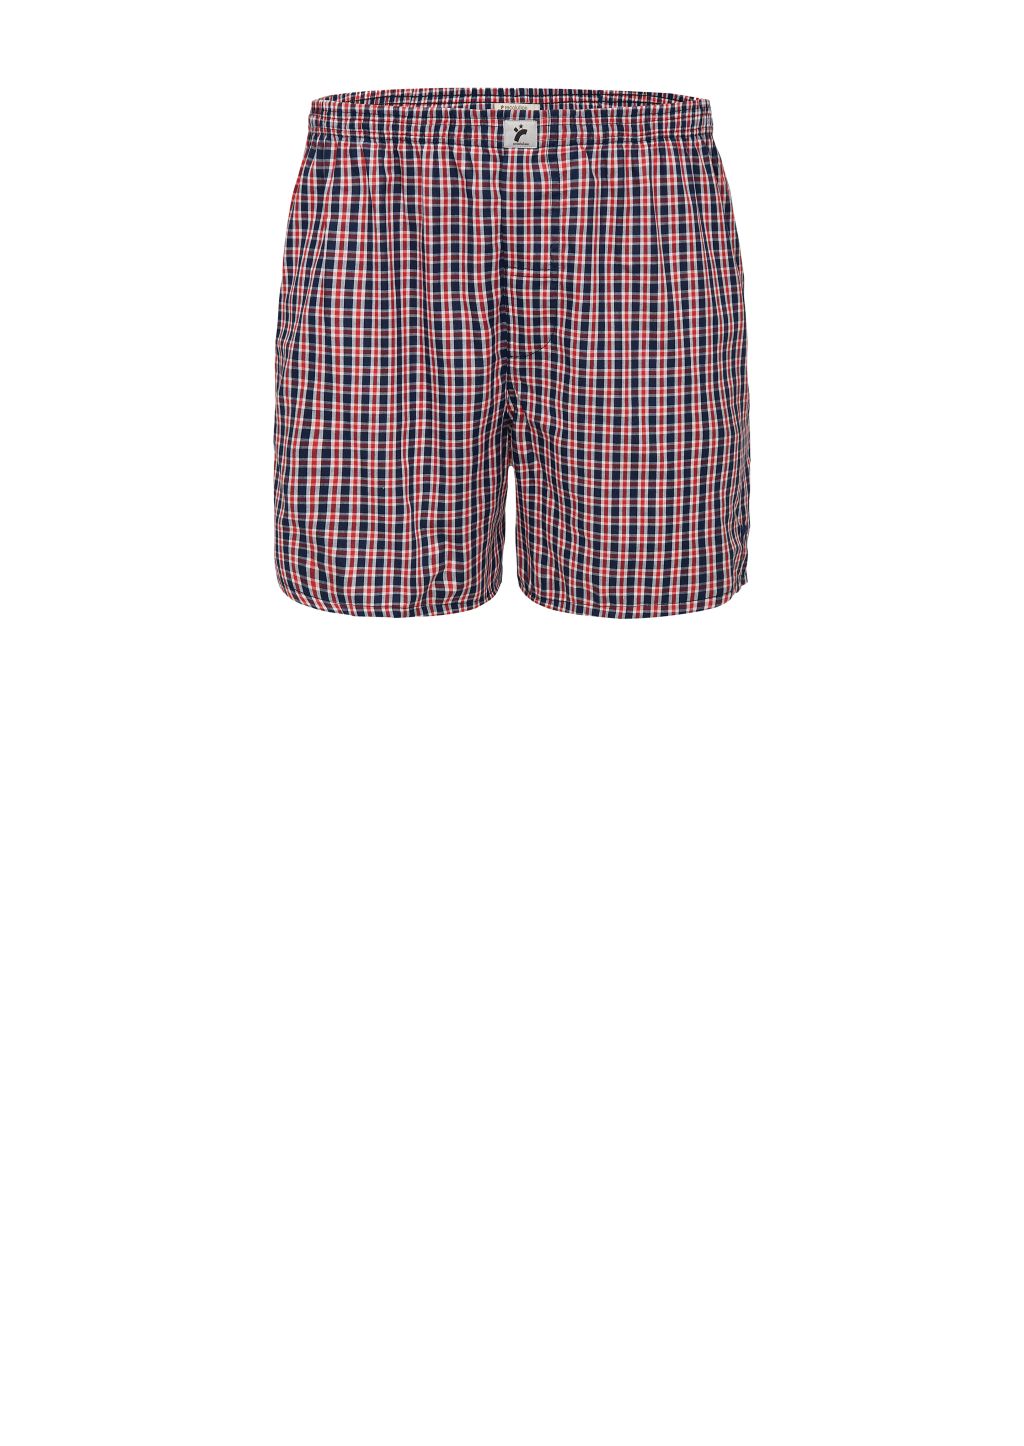 Männer Boxershorts #Checked Blue/White/Red Checked M